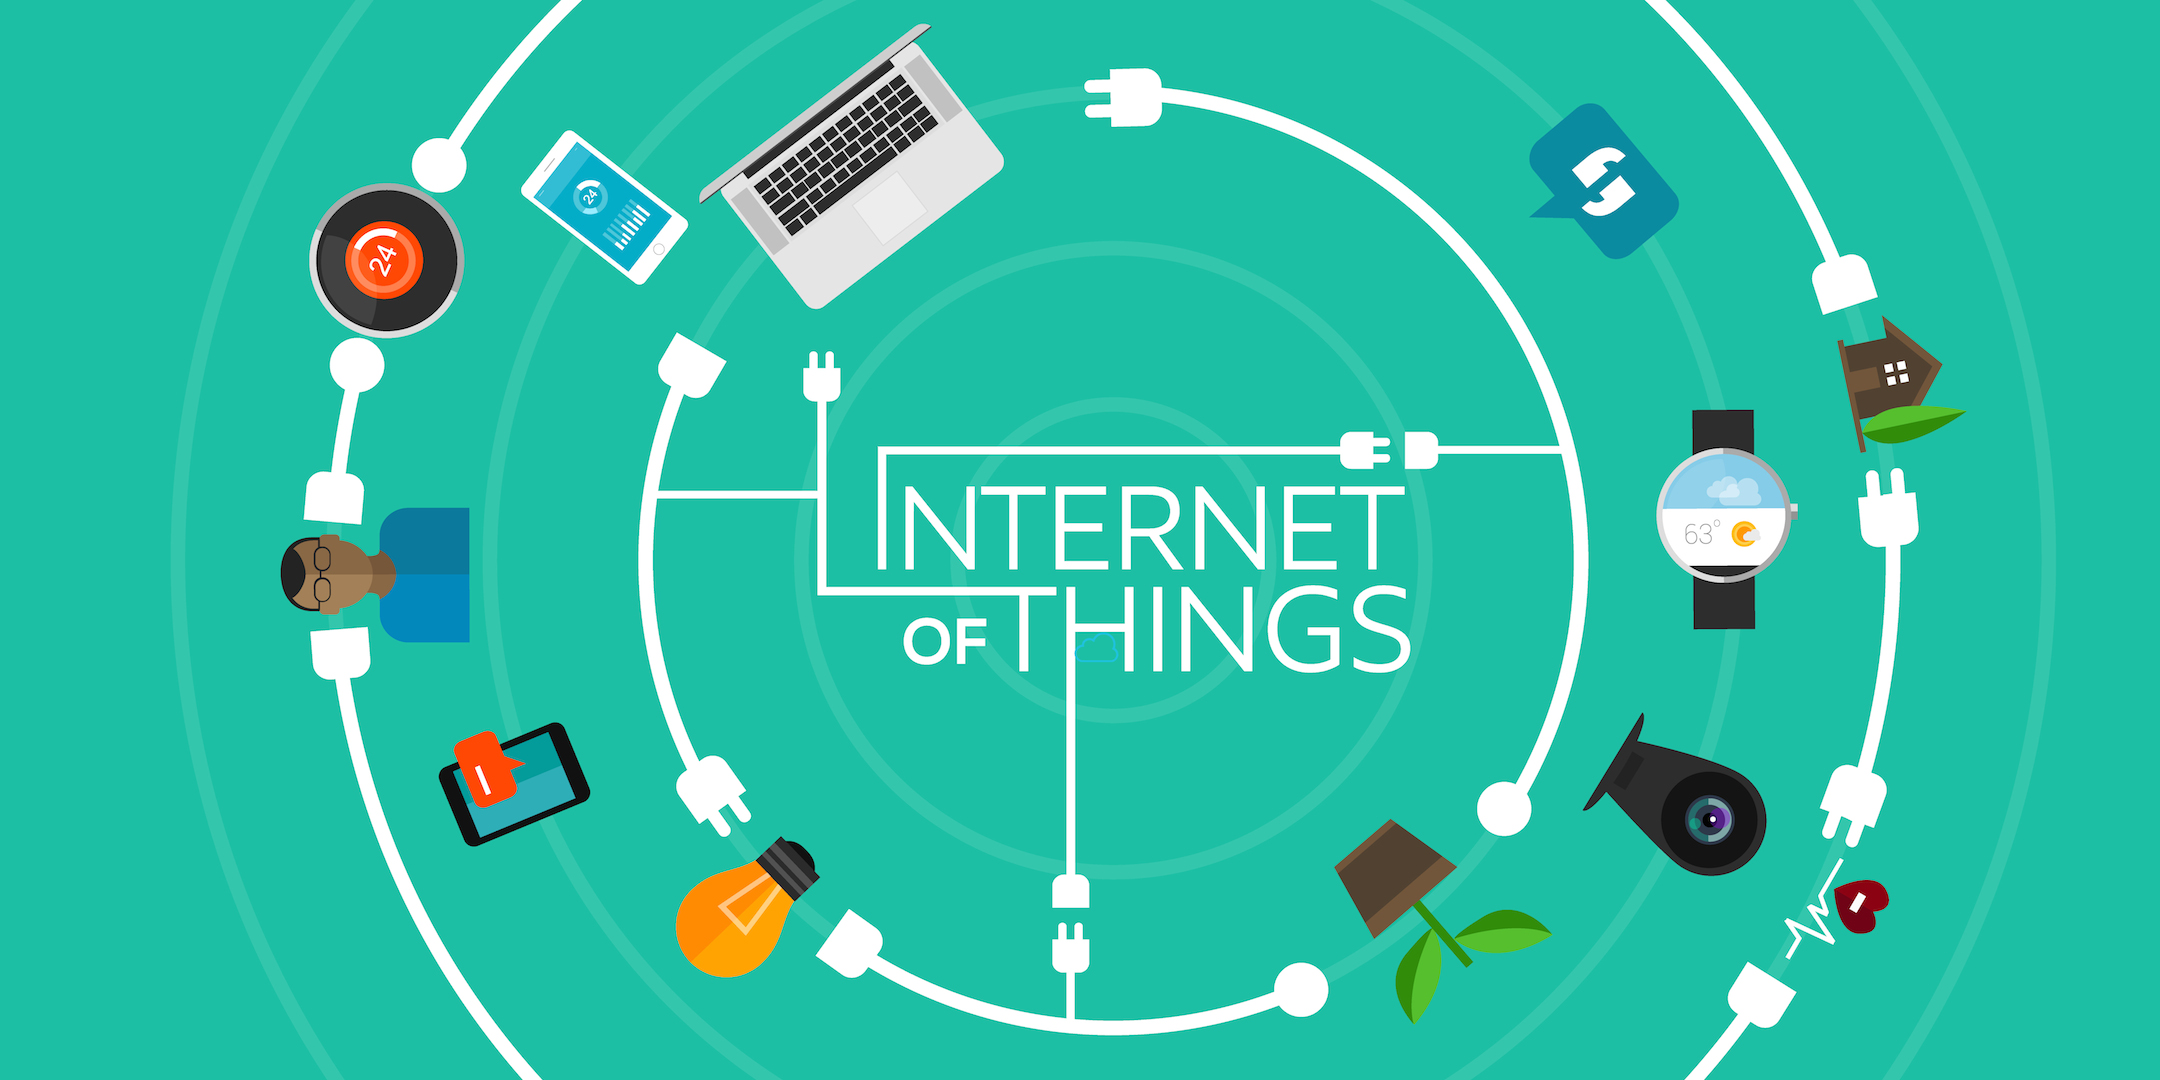 What if (almost) everything you used became smart-er? Welcome to the world of Internet of Things or IoT!